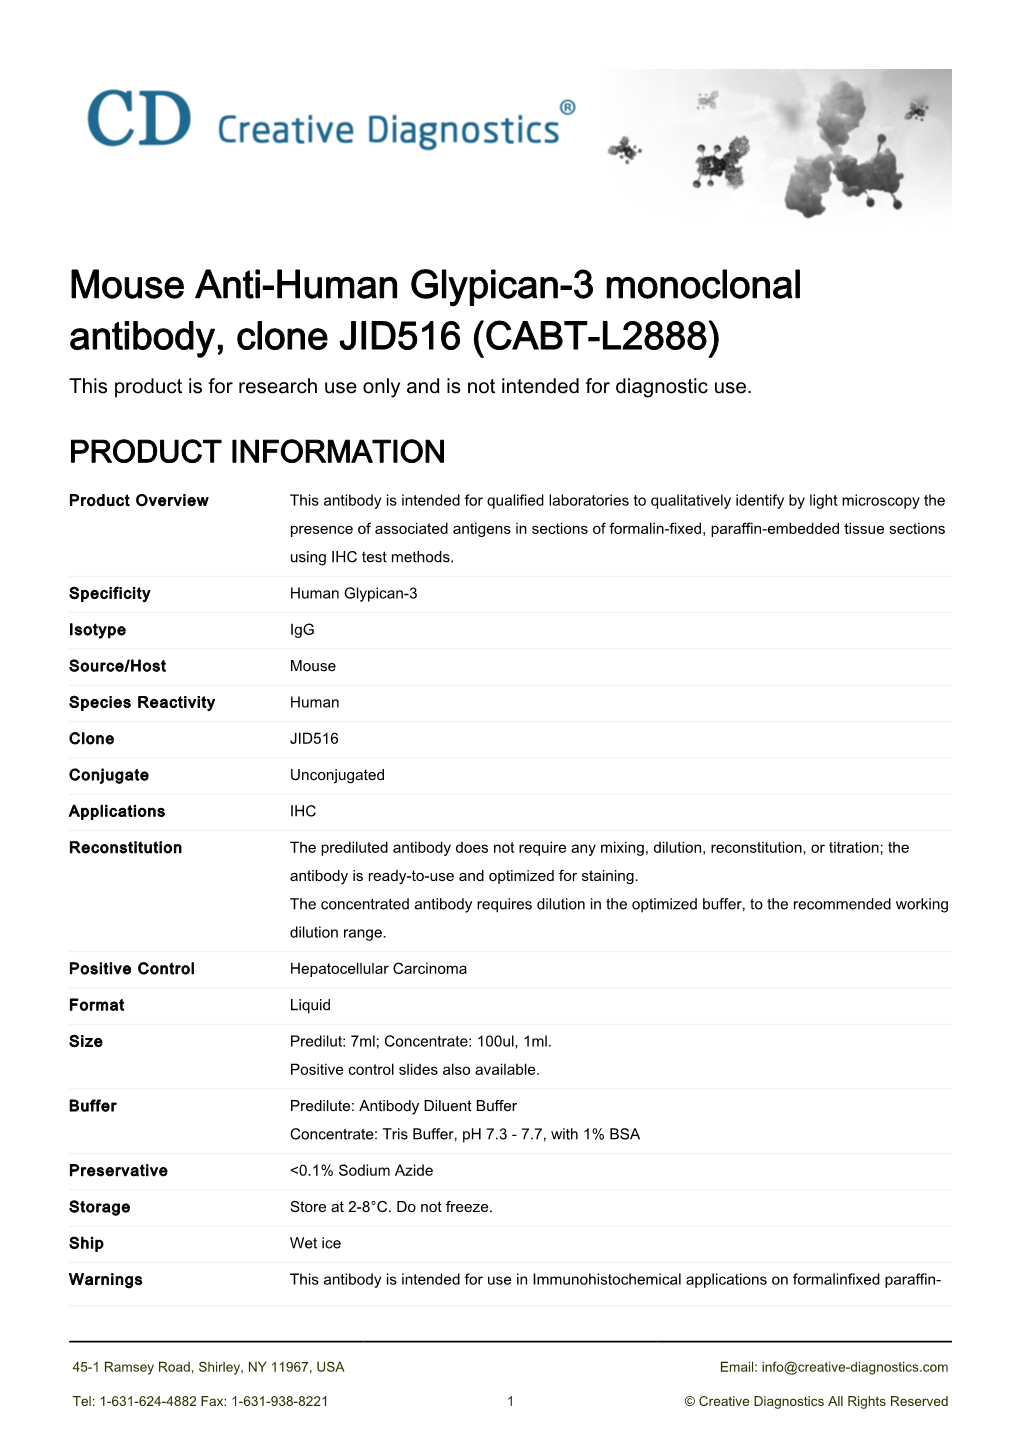 Mouse Anti-Human Glypican-3 Monoclonal Antibody, Clone JID516 (CABT-L2888) This Product Is for Research Use Only and Is Not Intended for Diagnostic Use